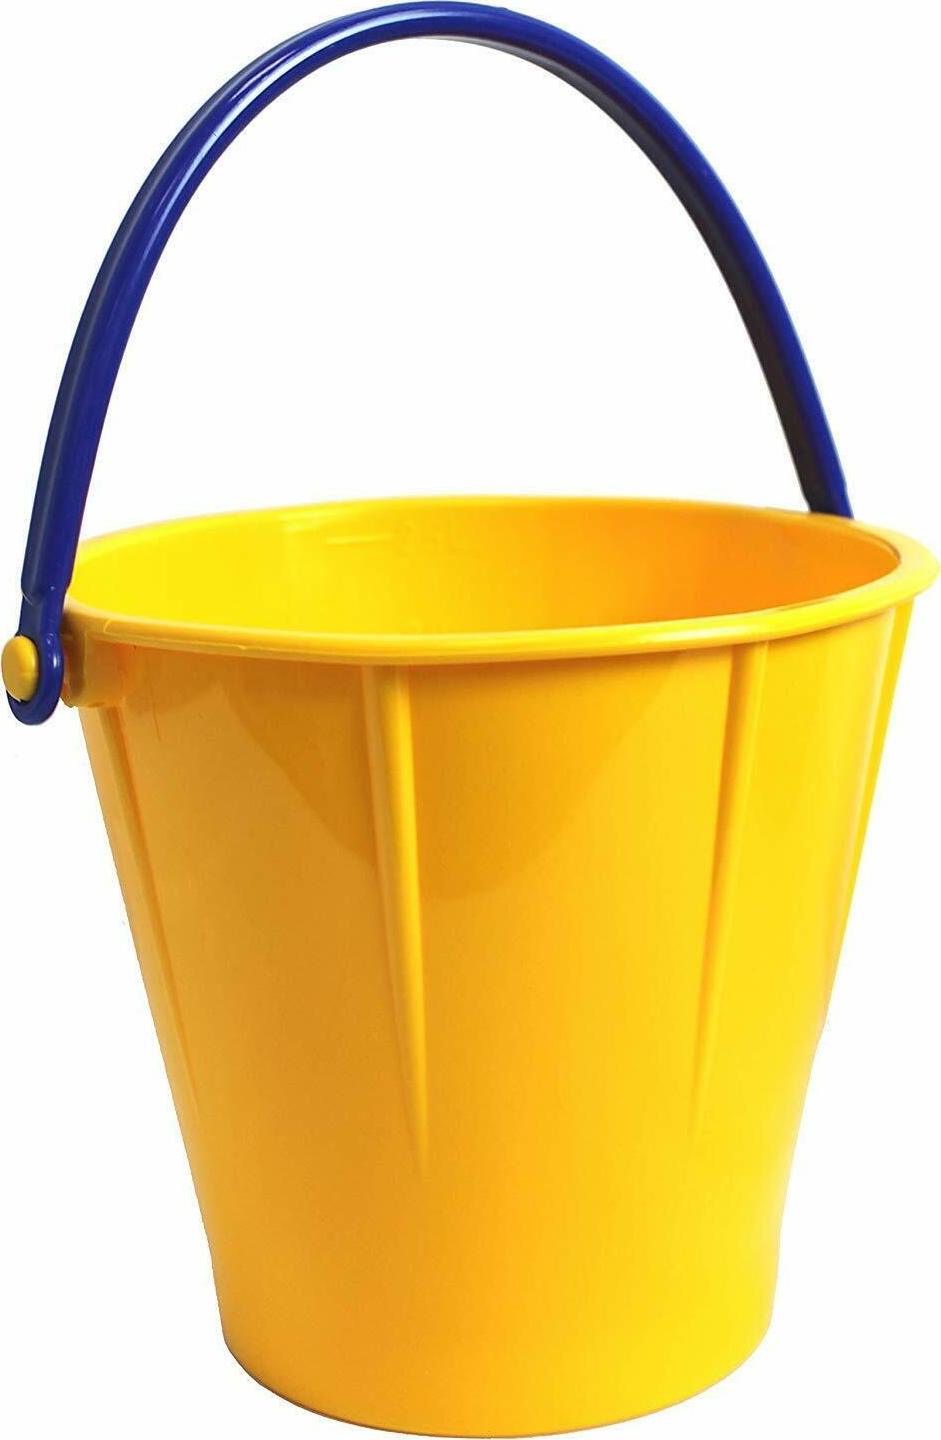 Mini Metal Buckets, Pails with Handles for Party Favors, Easter (6-pack)